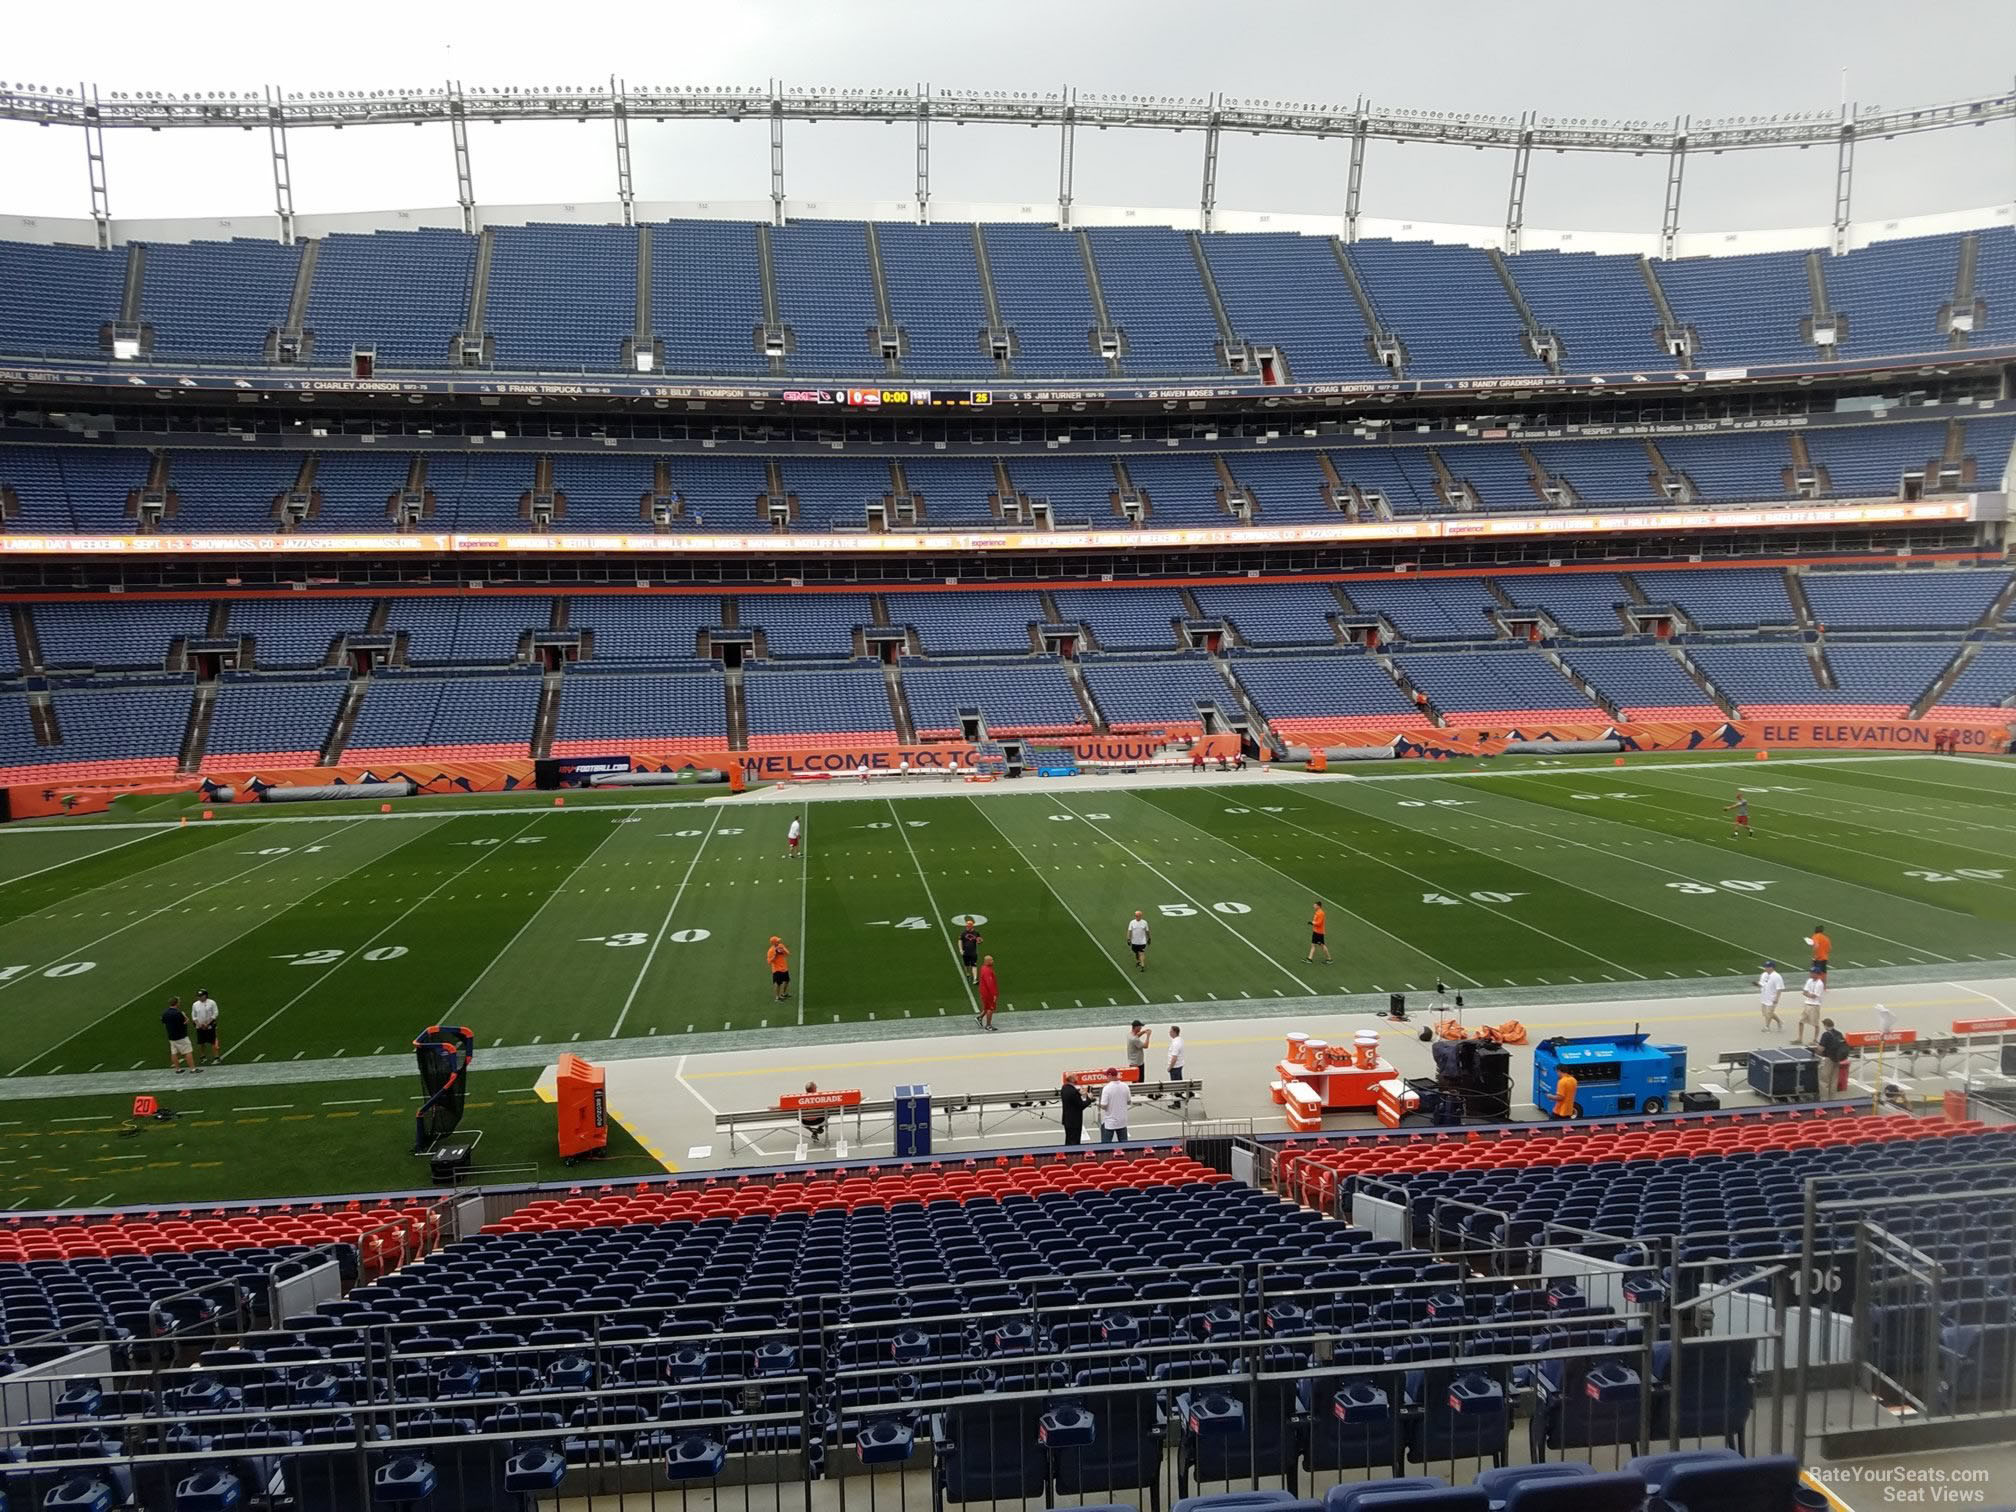 section 106, row 30 seat view  - empower field (at mile high)